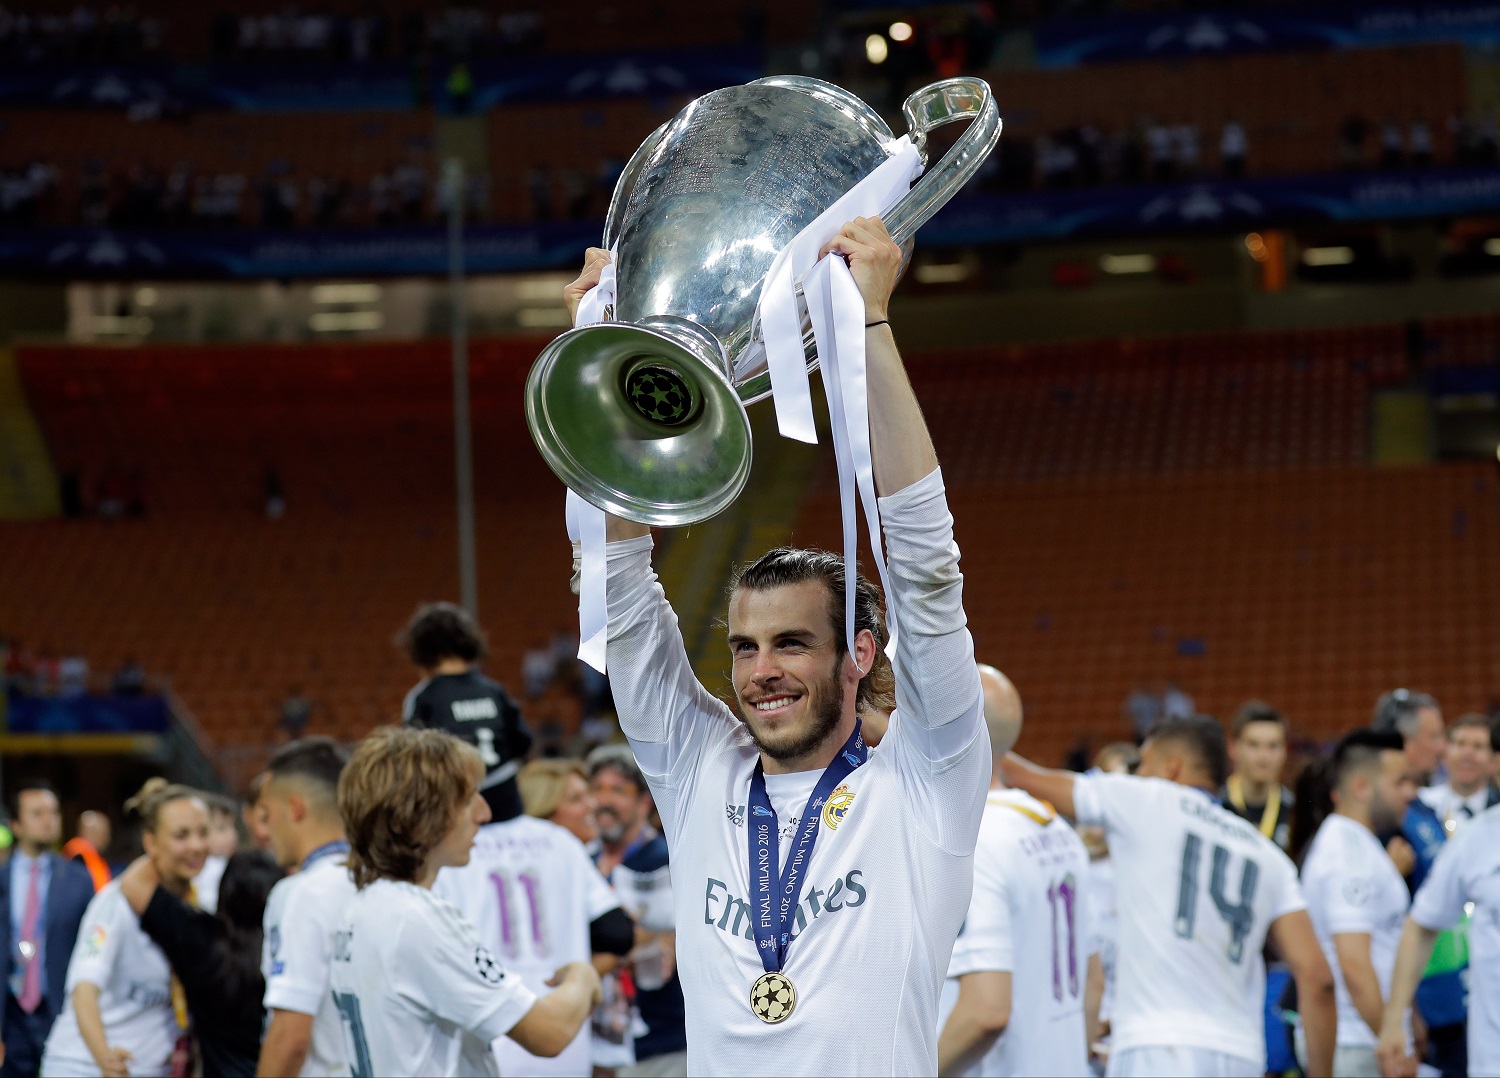 Real Madrid's Gareth Bale celebrates  after the Champions League final soccer match between Real Madrid and Atletico Madrid at the San Siro stadium in Milan, Italy, Saturday, May 28, 2016. Real Madrid won 5-4 on penalties after the match ended 1-1 after extra time.     (AP Photo/Manu Fernandez)